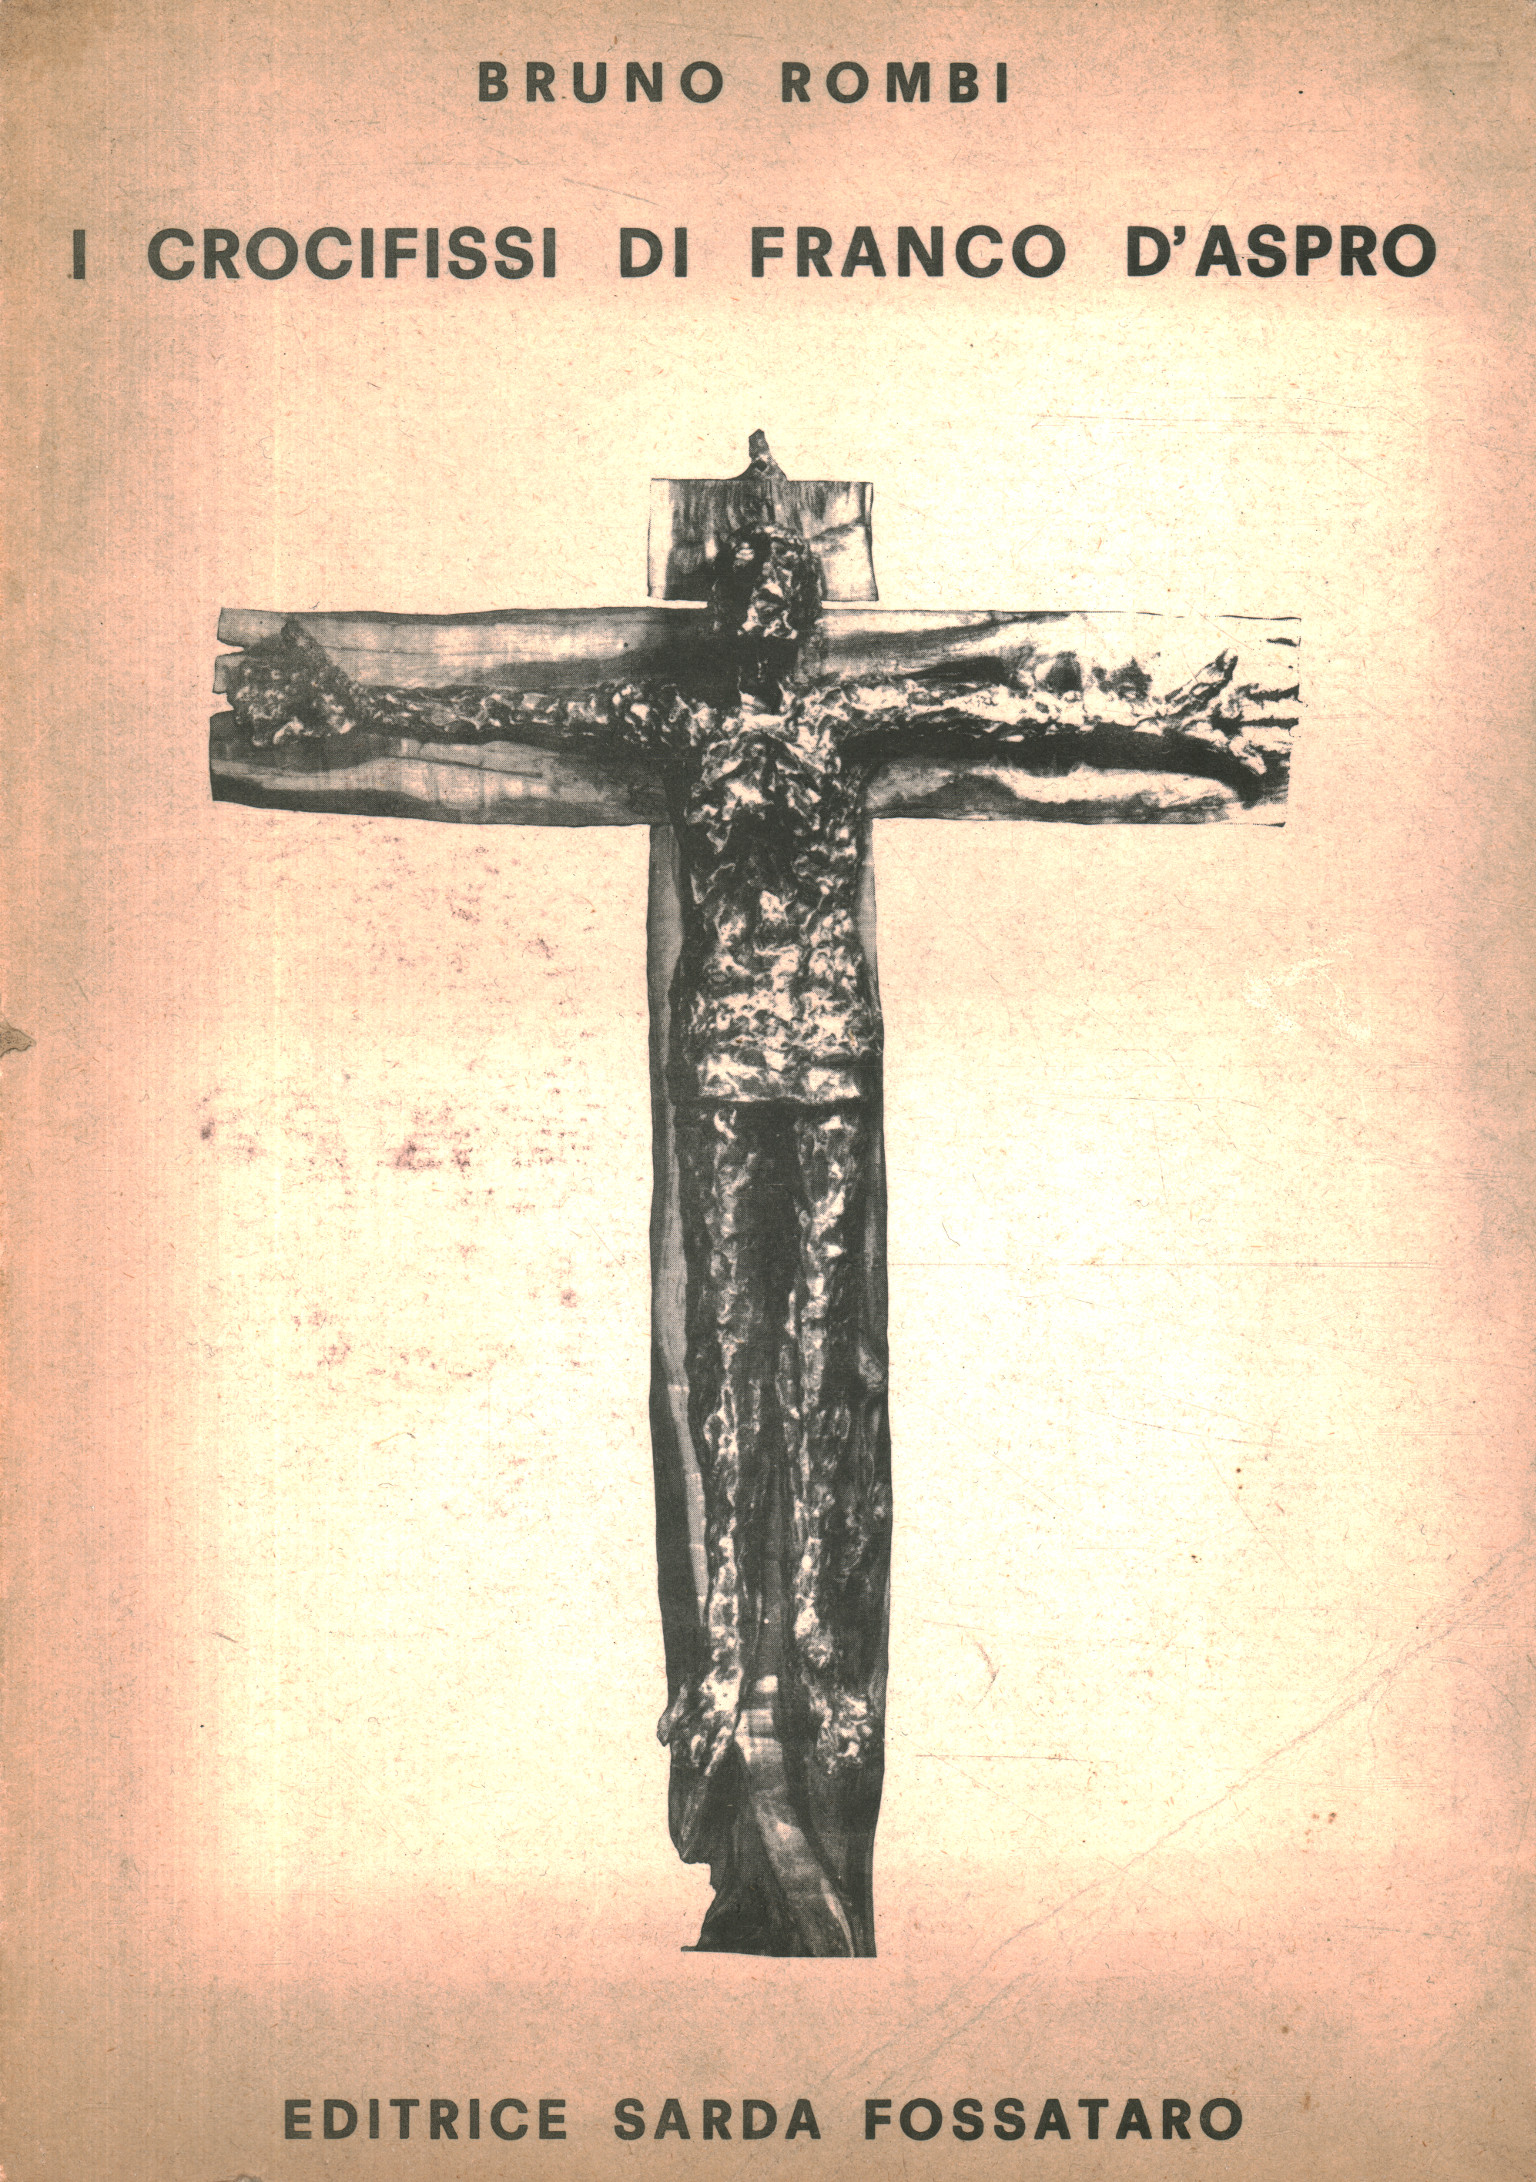 The crucifixes by Franco d'Aspro